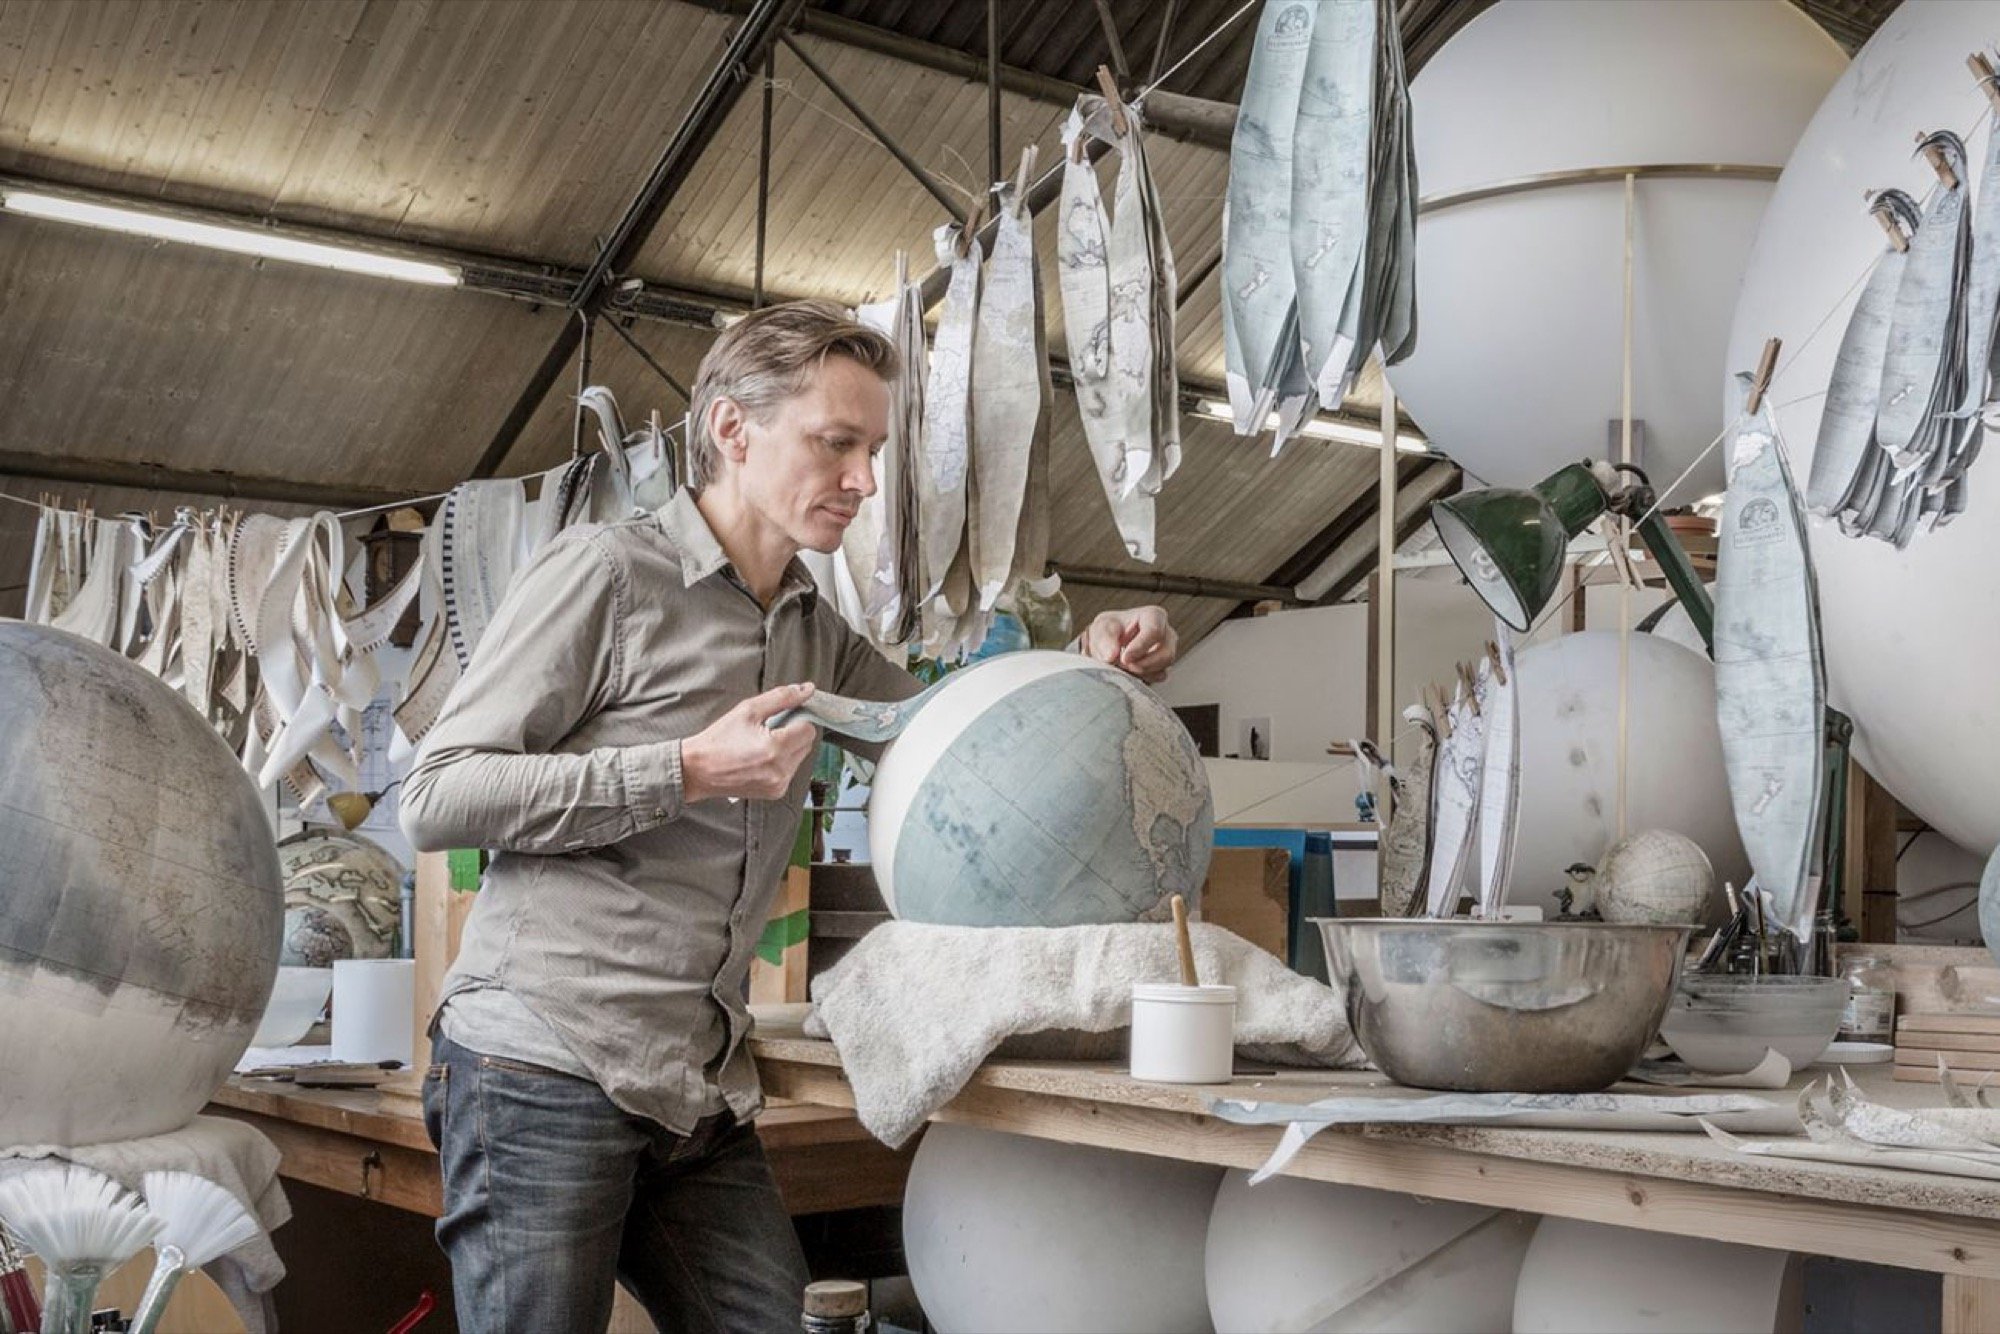 From $150,000 in Debt to $4 Million in Revenue: How One Man Built a Wildly Successful Globe-Making Business